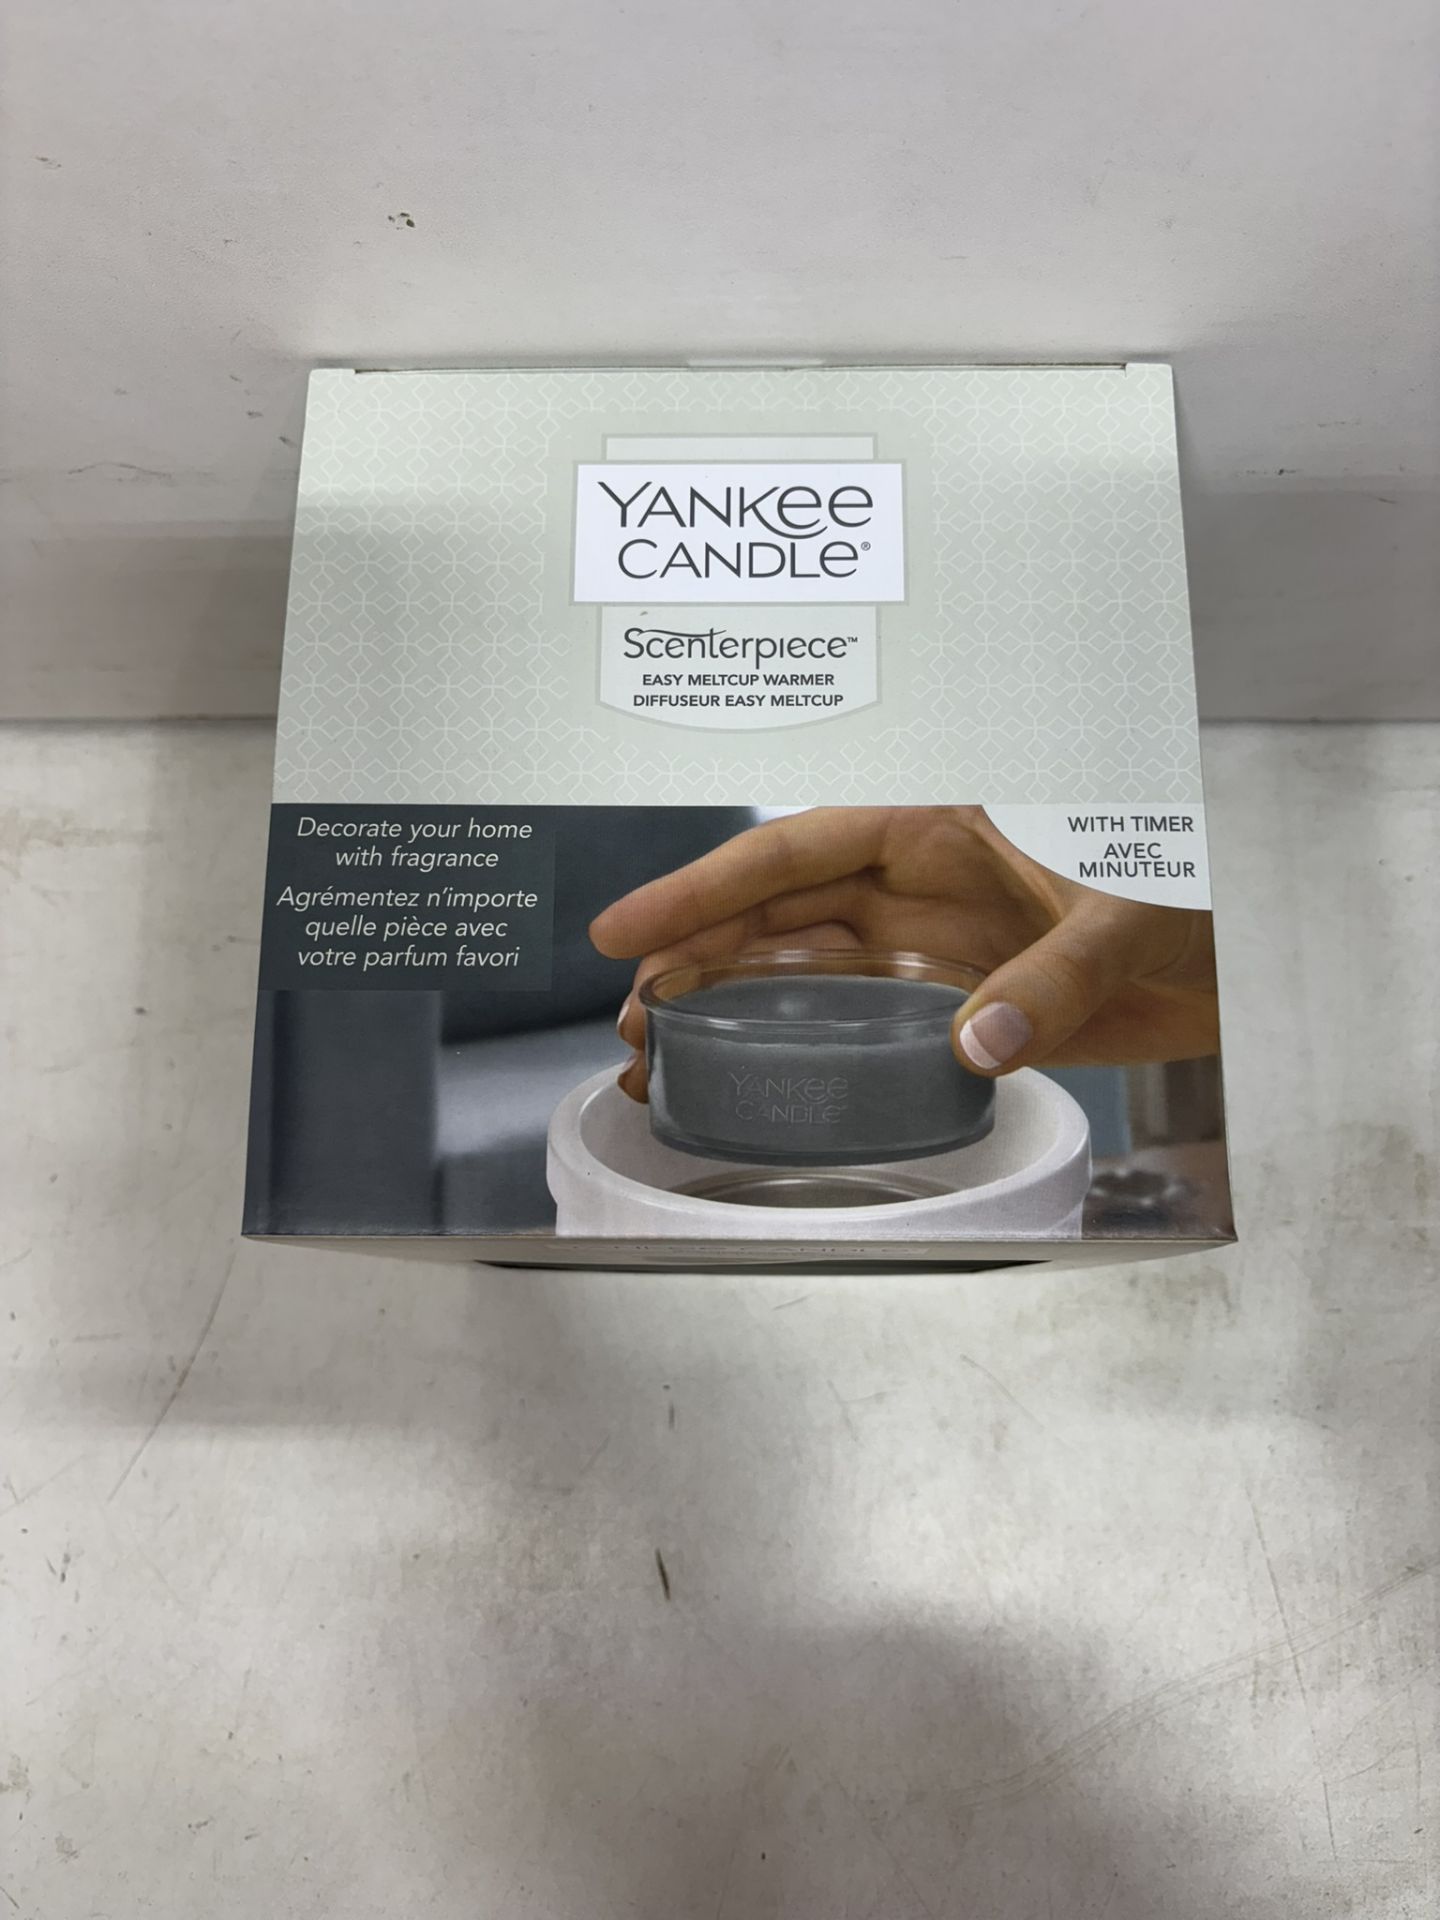 13 x Yankee Candle Belmont Ceramic Melt Cup Scenterpiece Warmers - Image 3 of 7